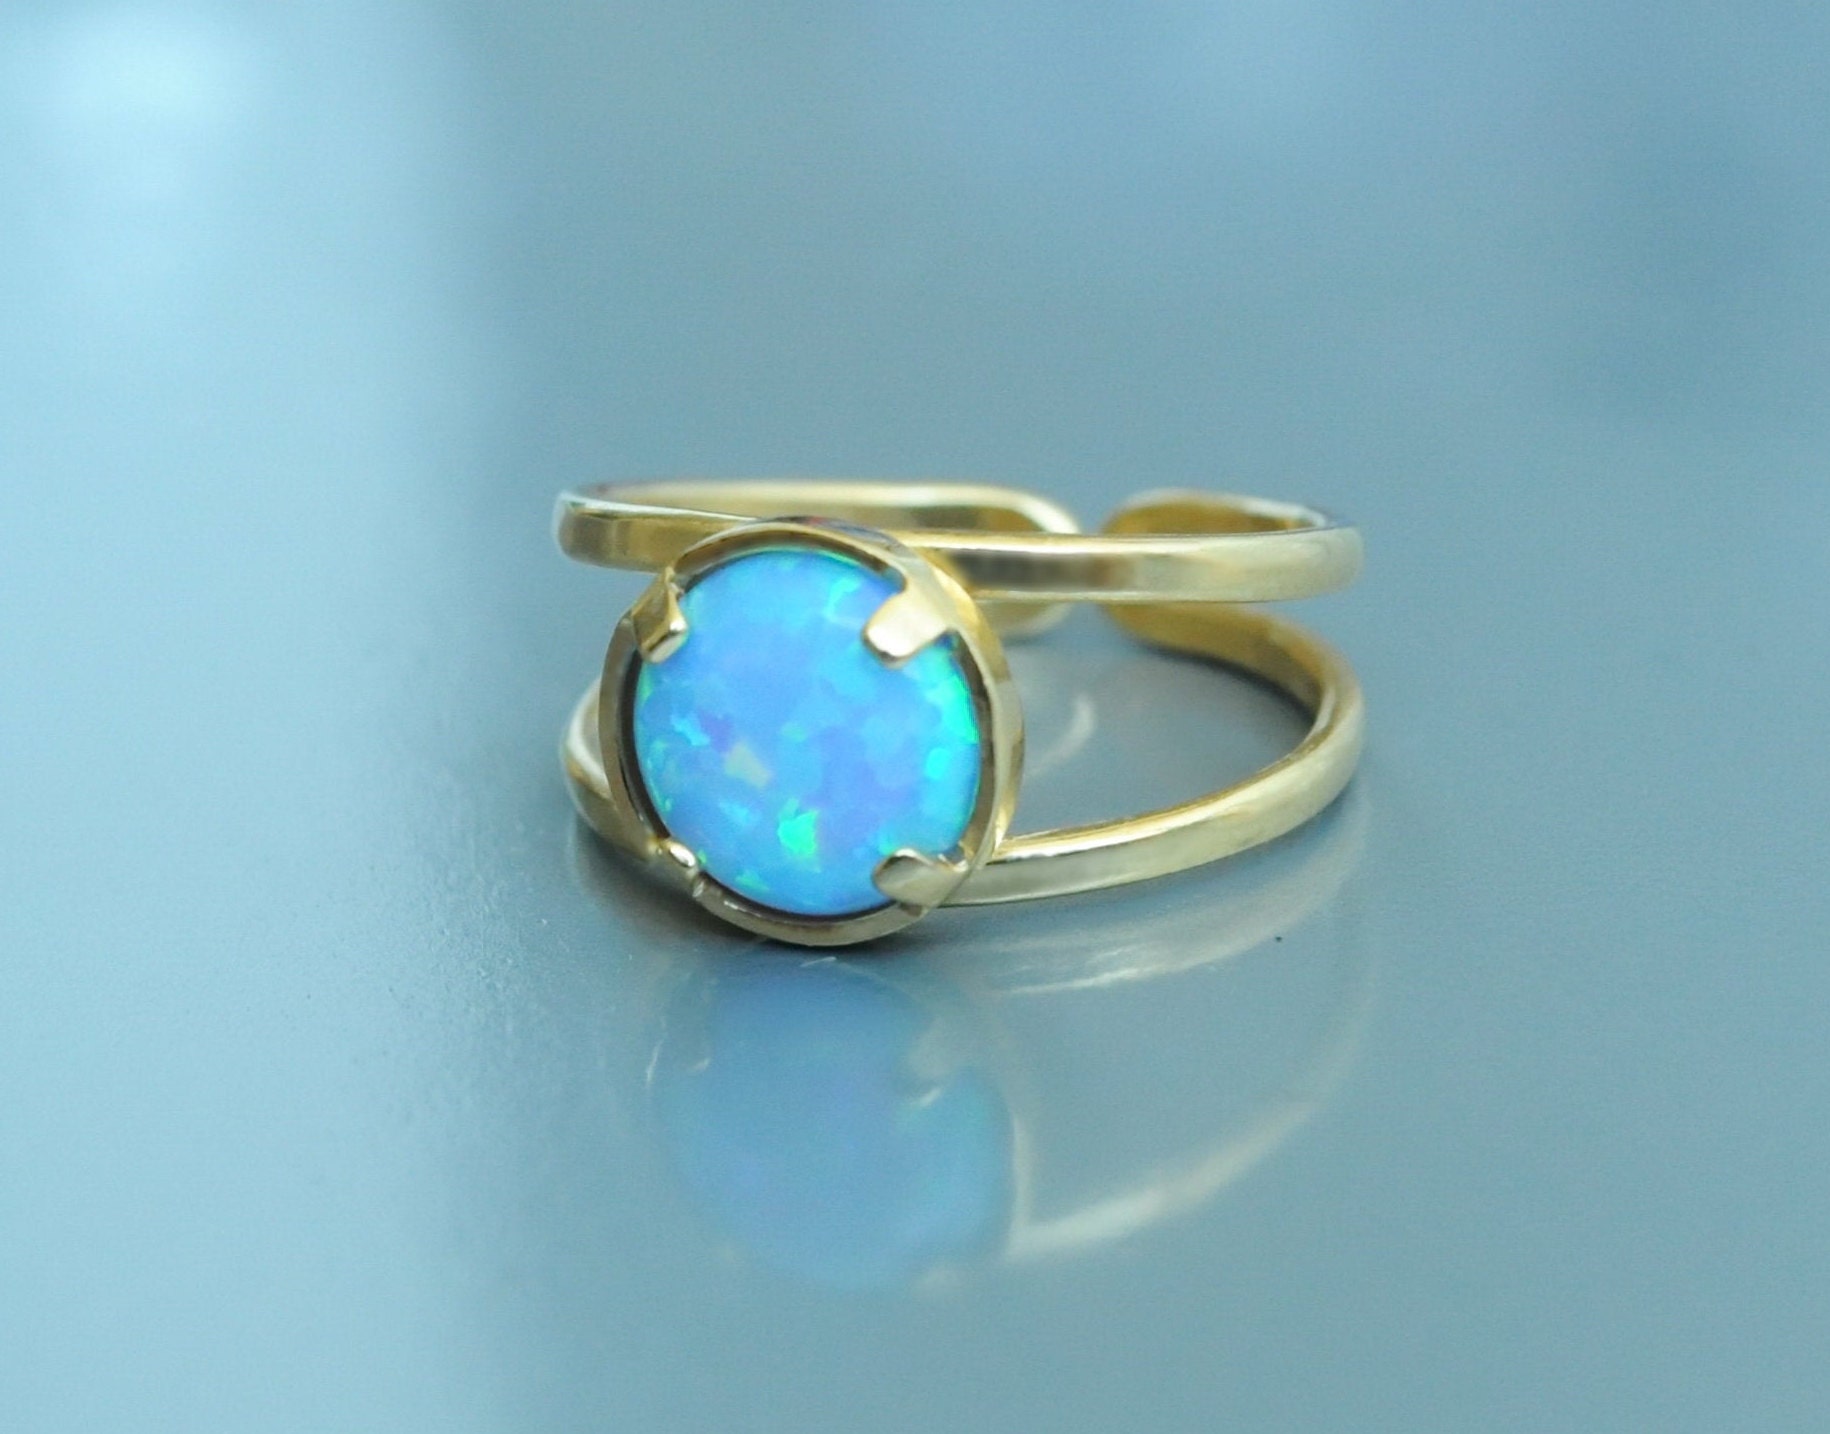 Blue Opal ring. Adjustable ring. Opal Ring Sterling Silver. | Etsy